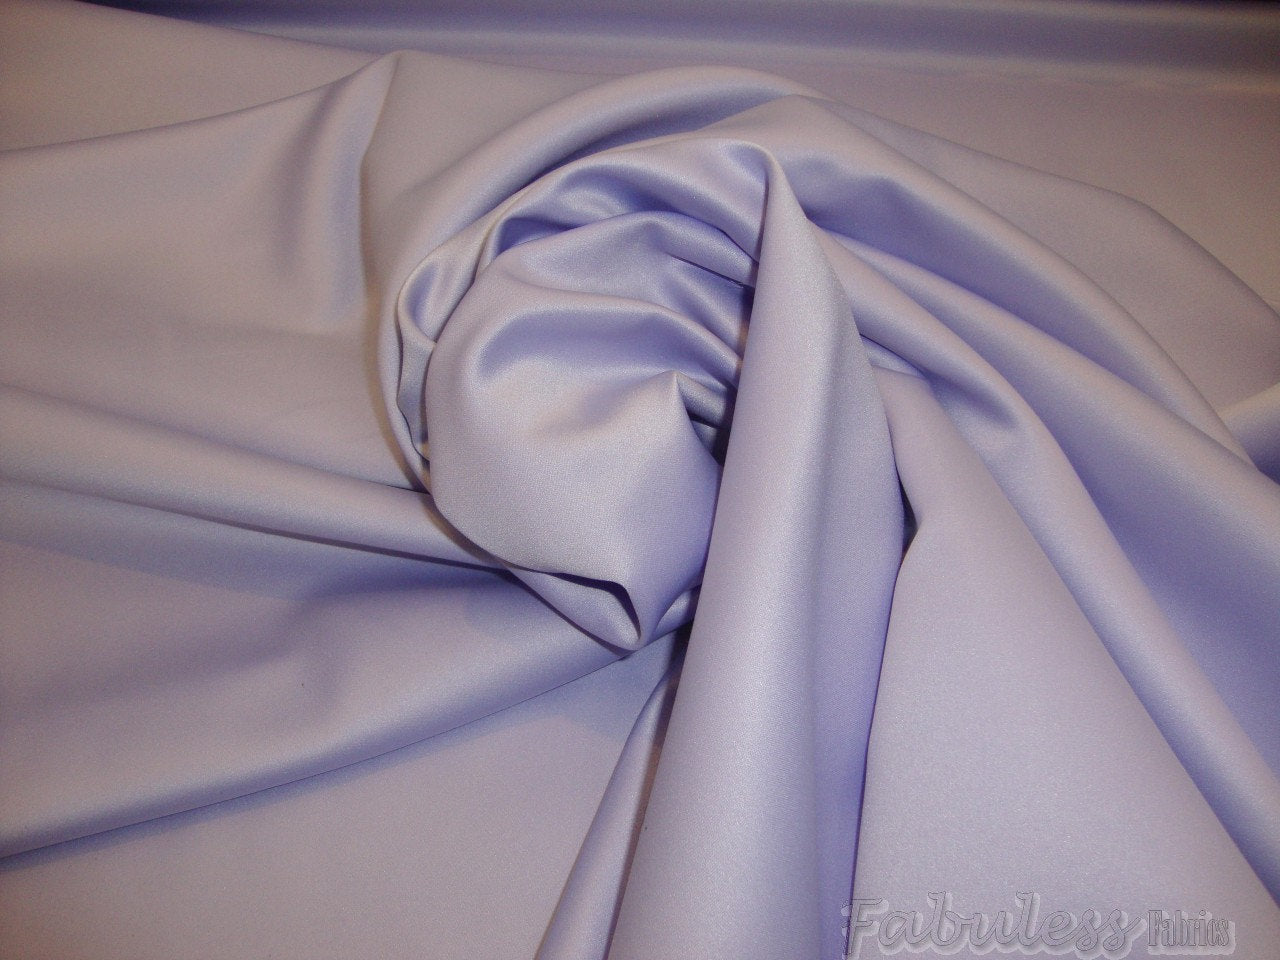 Lavender Lamour Dull Bridal Satin Polyester 58" Wide || Fabric by the Yard